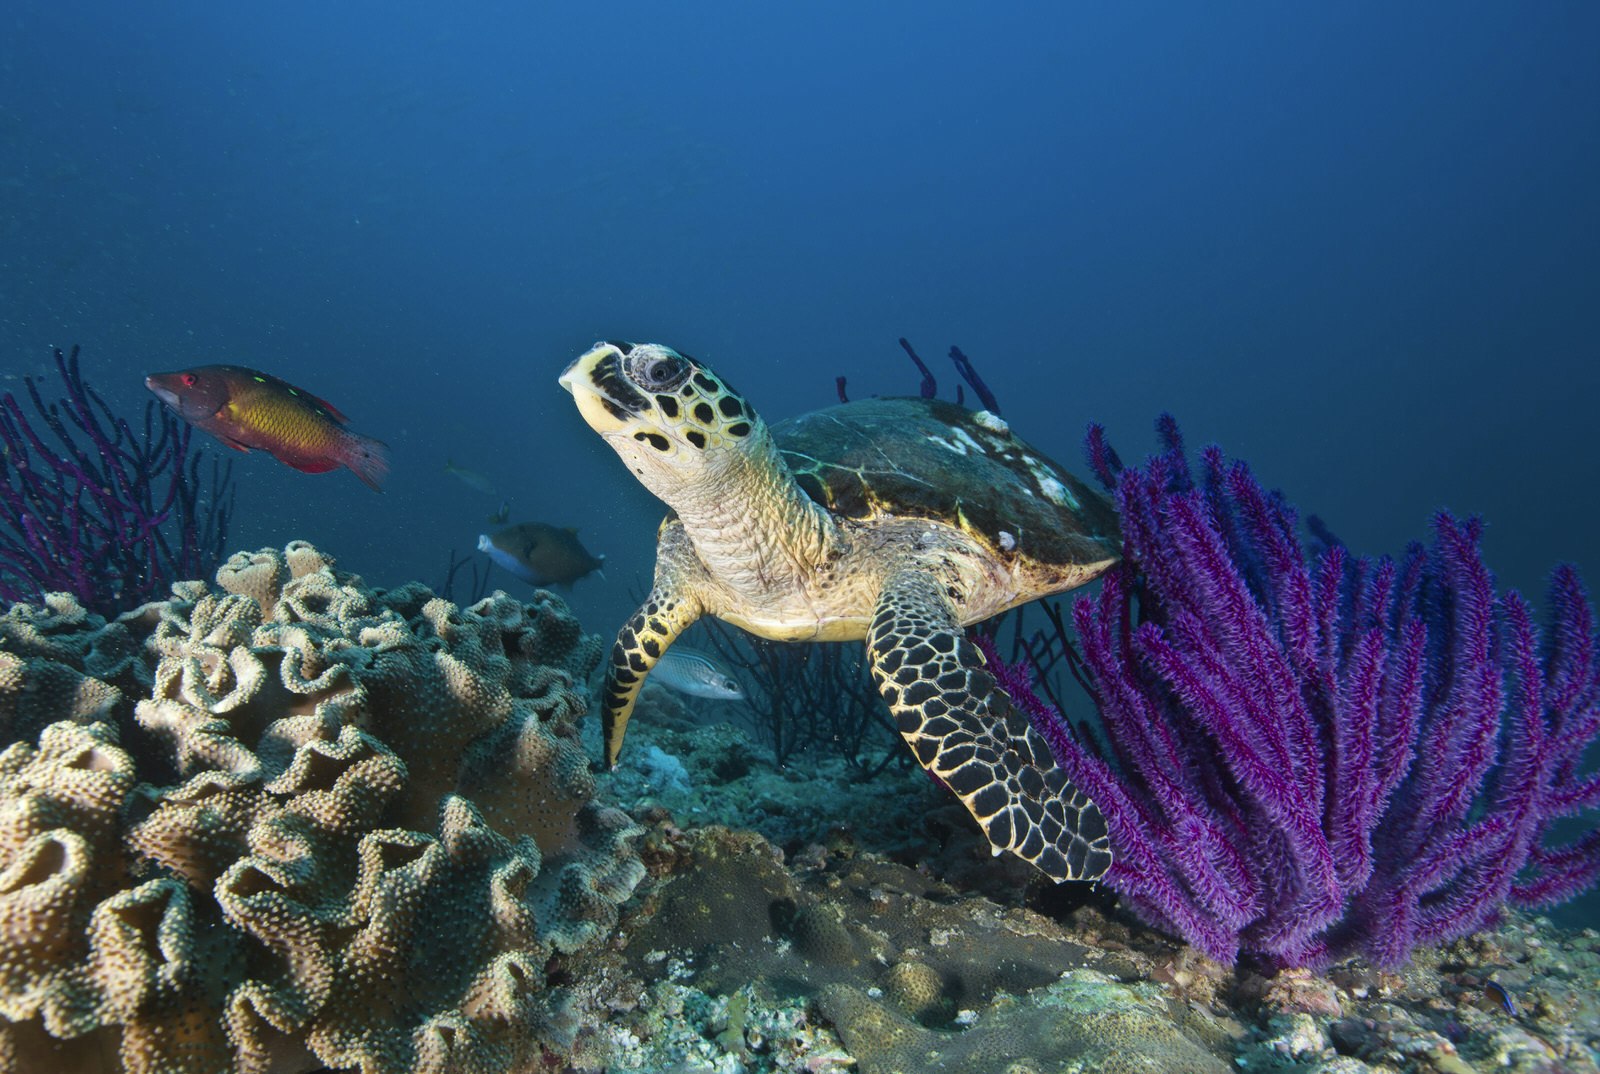 A hawksbill turtle paddles through purple whip coral © Liquid_Light / Getty Images